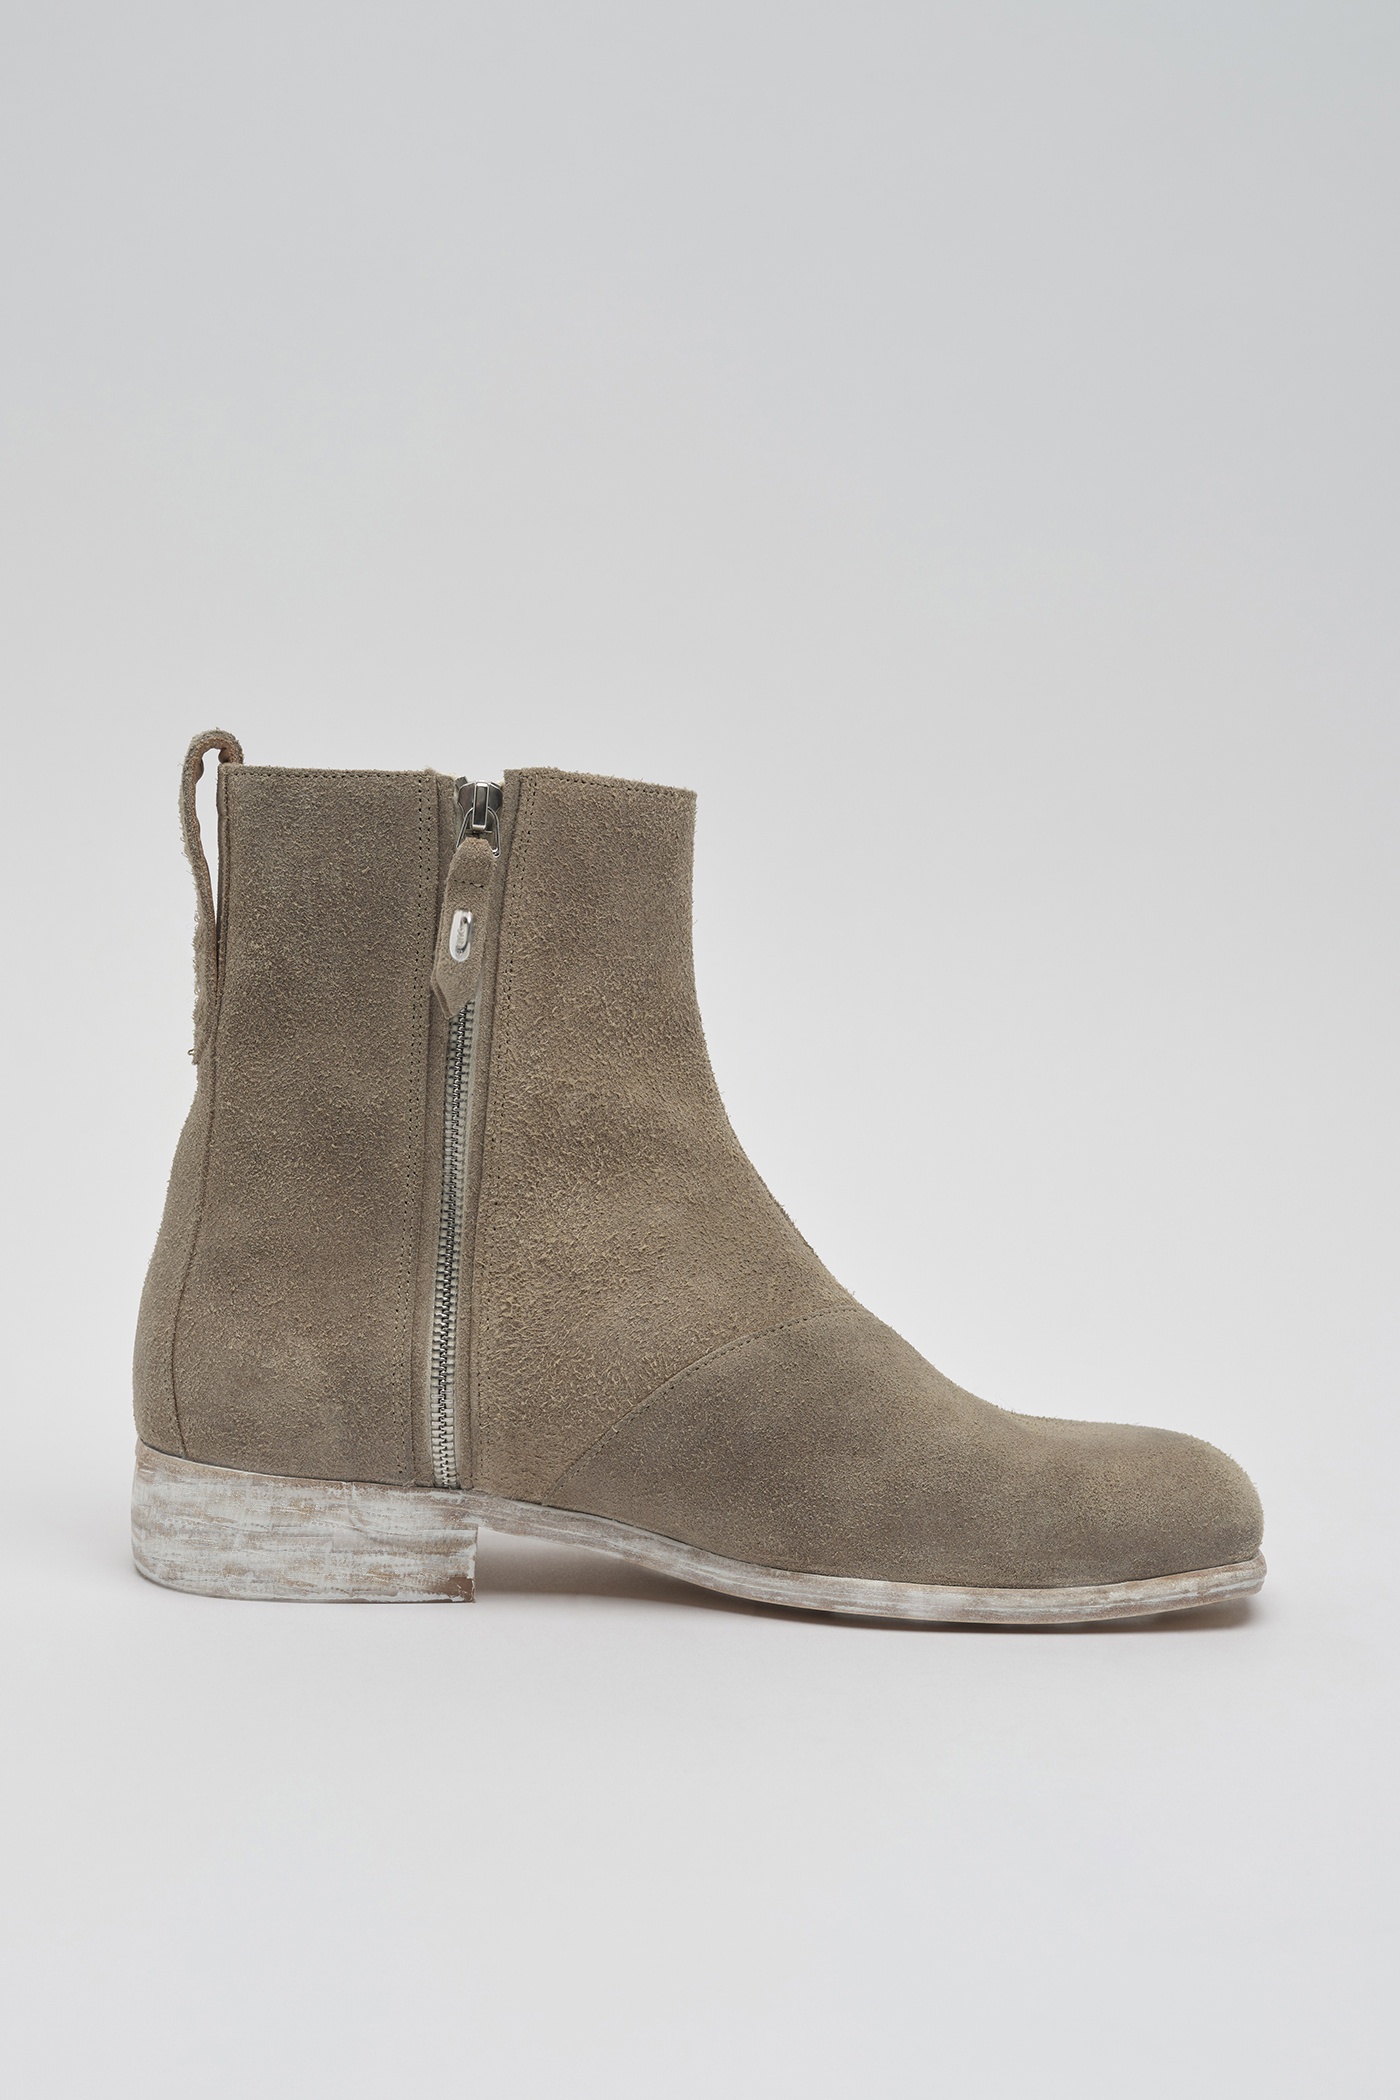 Michaelis Boot Waxy Champagne Suede - 4